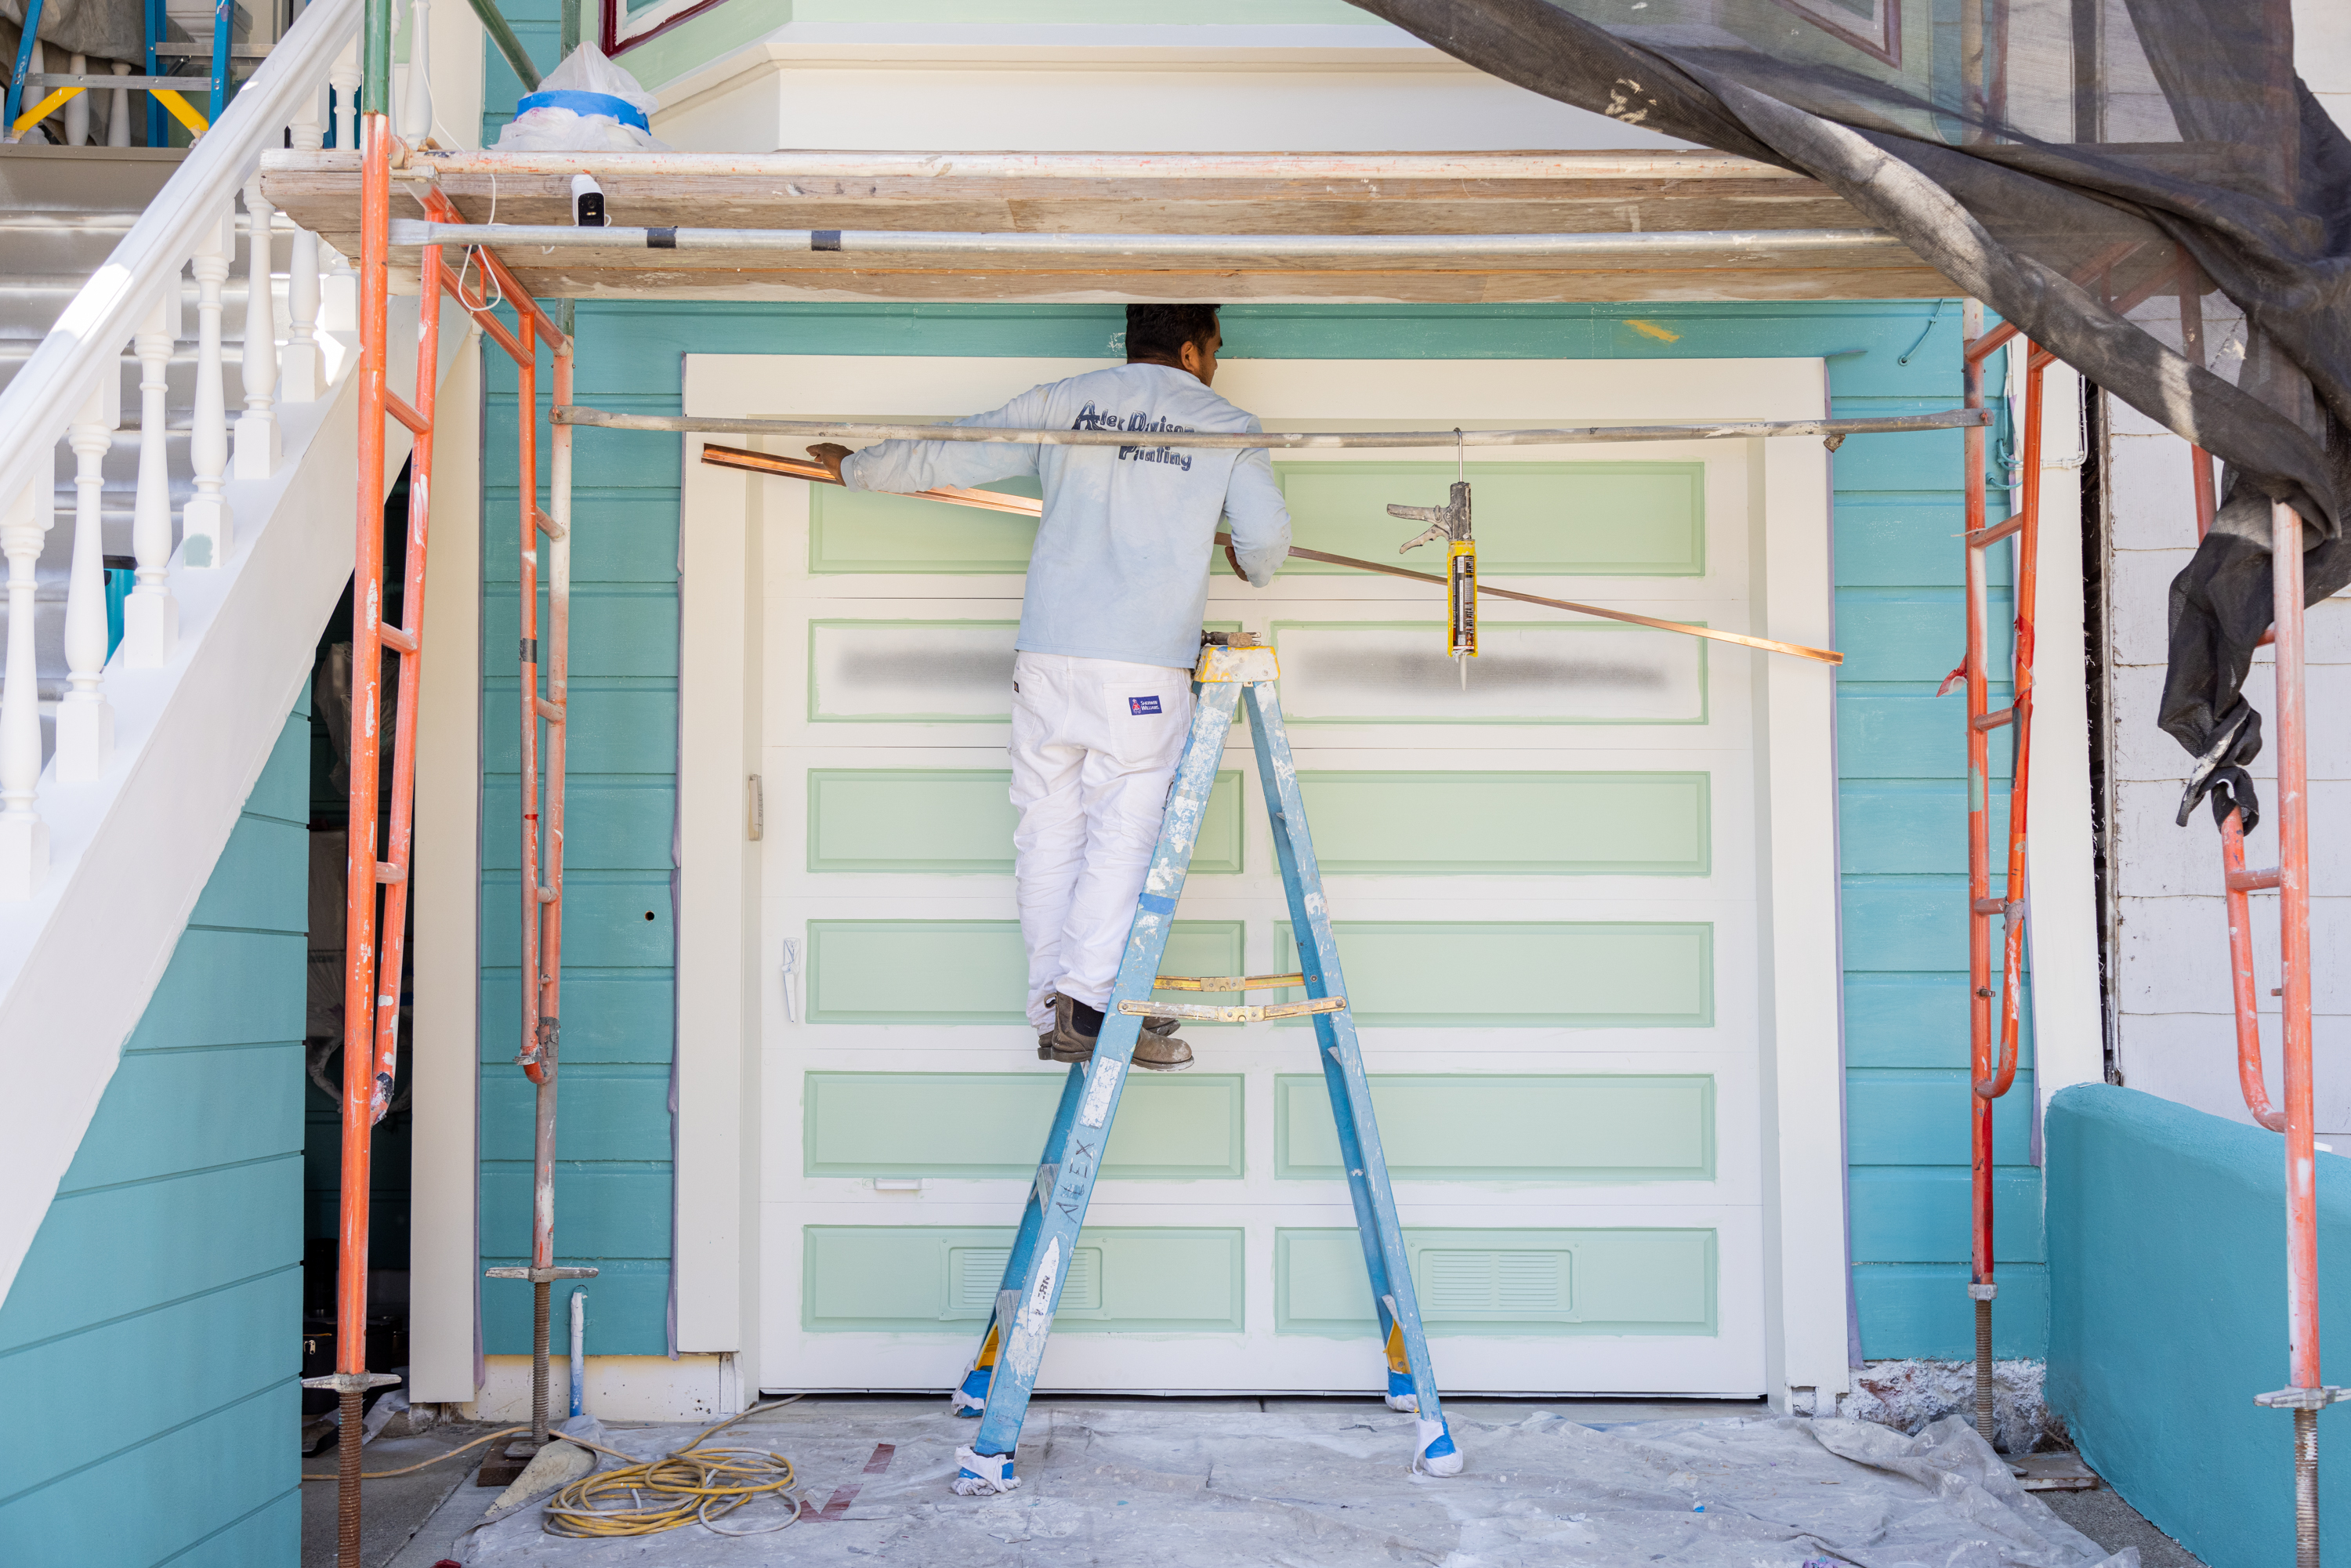 A person on a ladder is installing trim above a green garage door, surrounded by construction tools and materials.